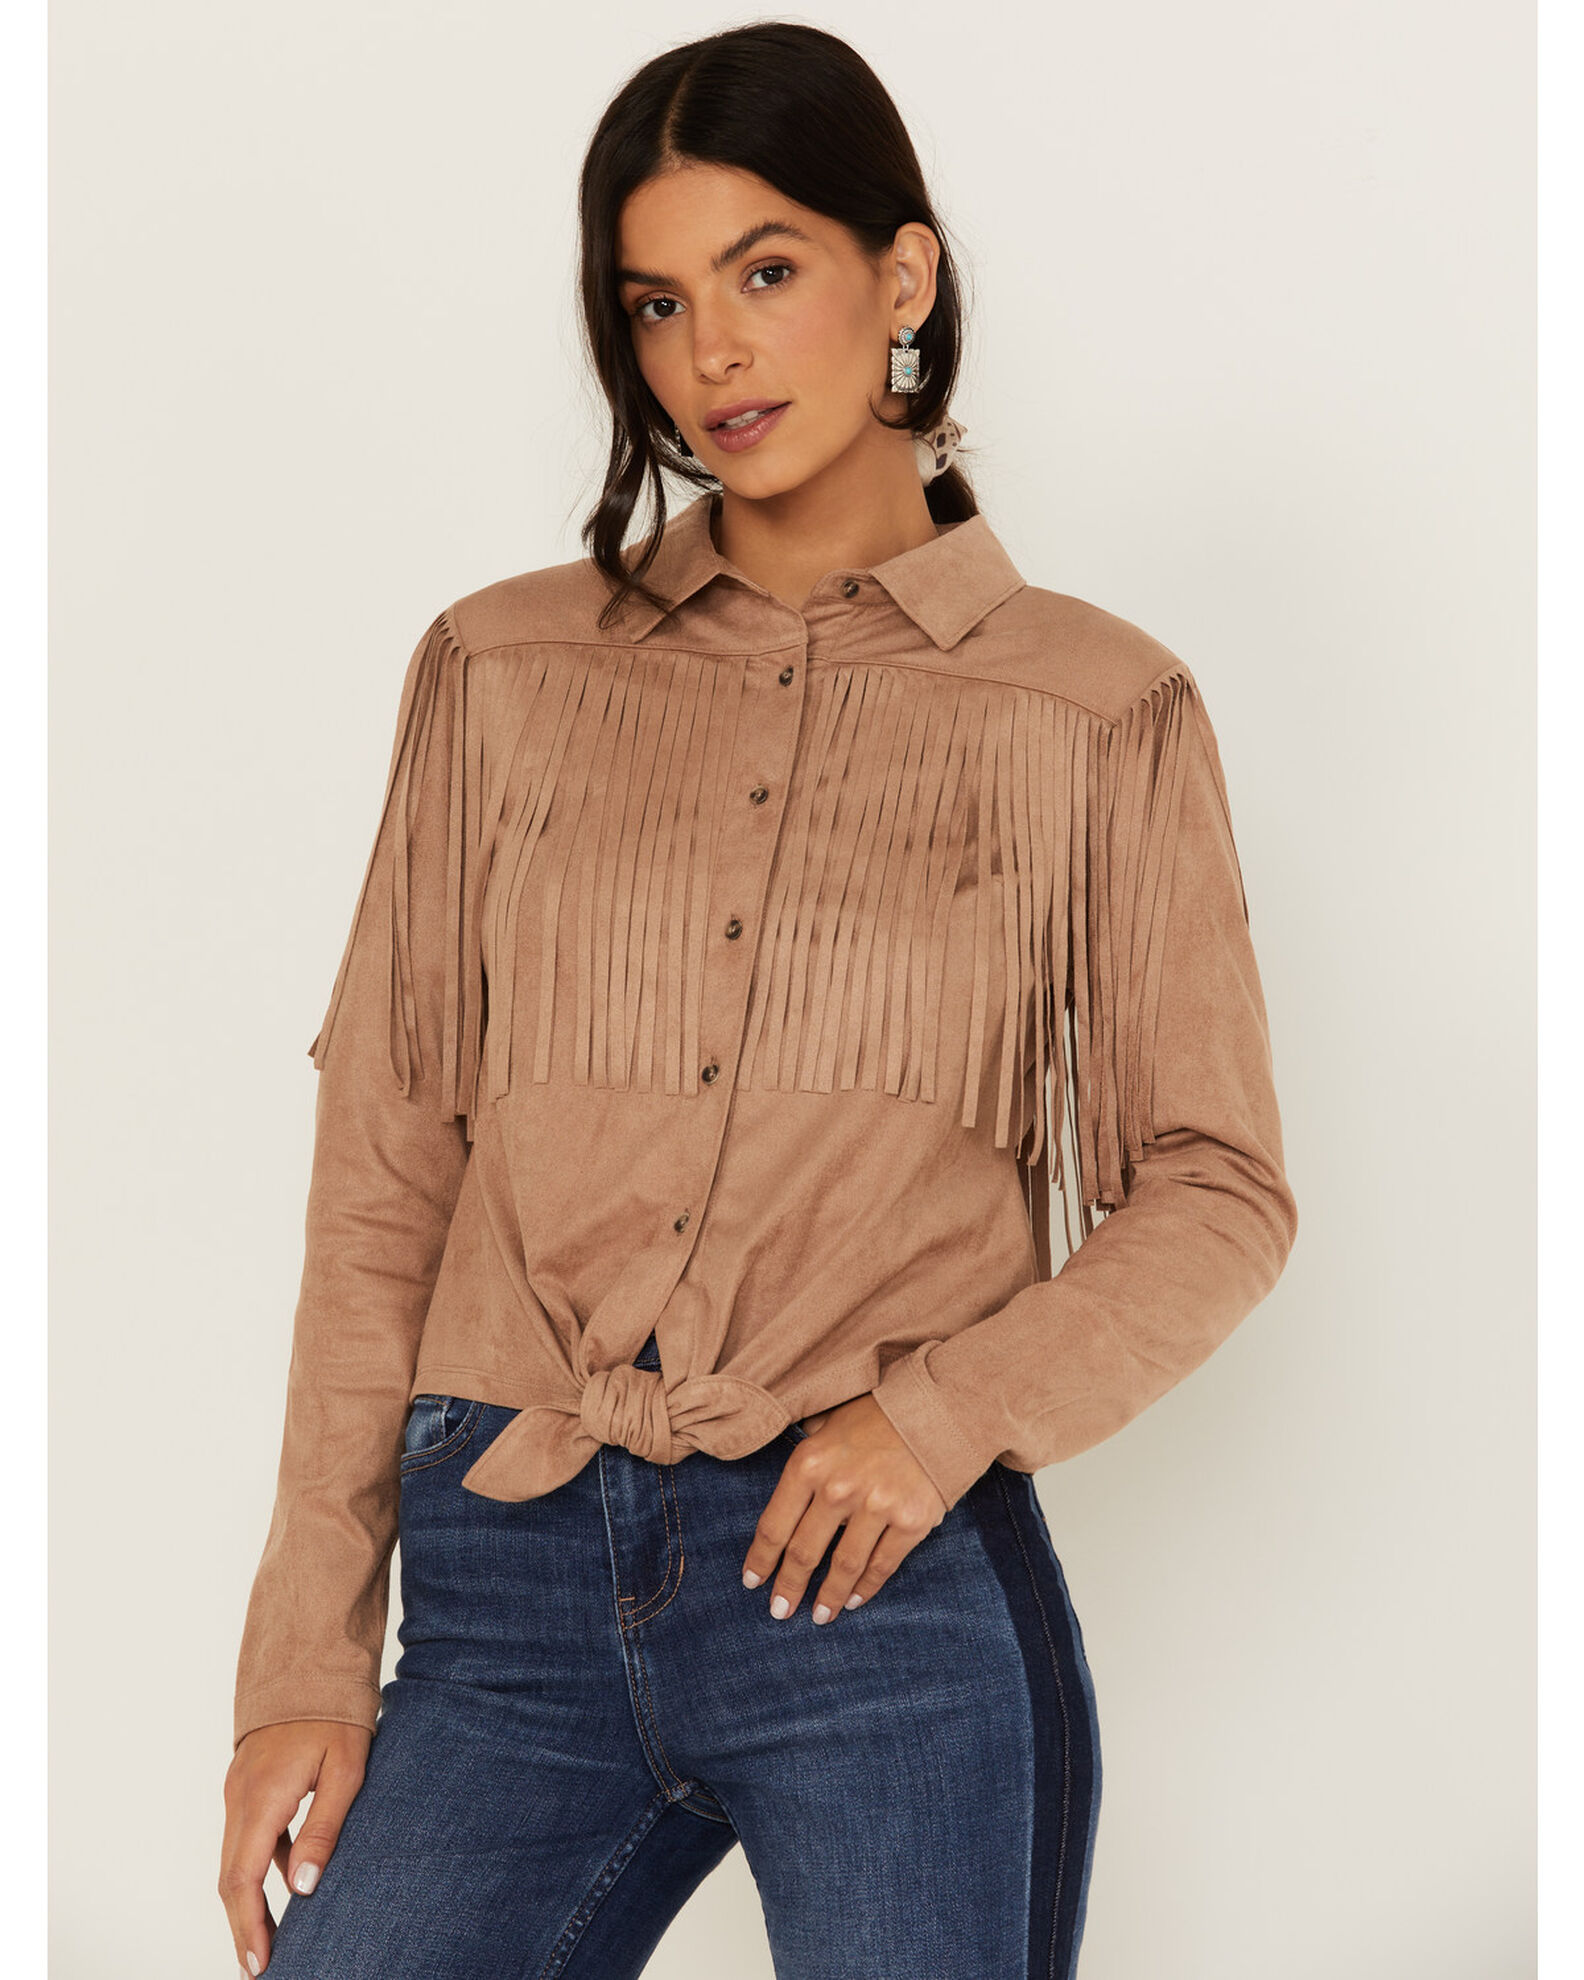 Idyllwind Women's Fate Tie-Front Faux Suede Fringe Shirt